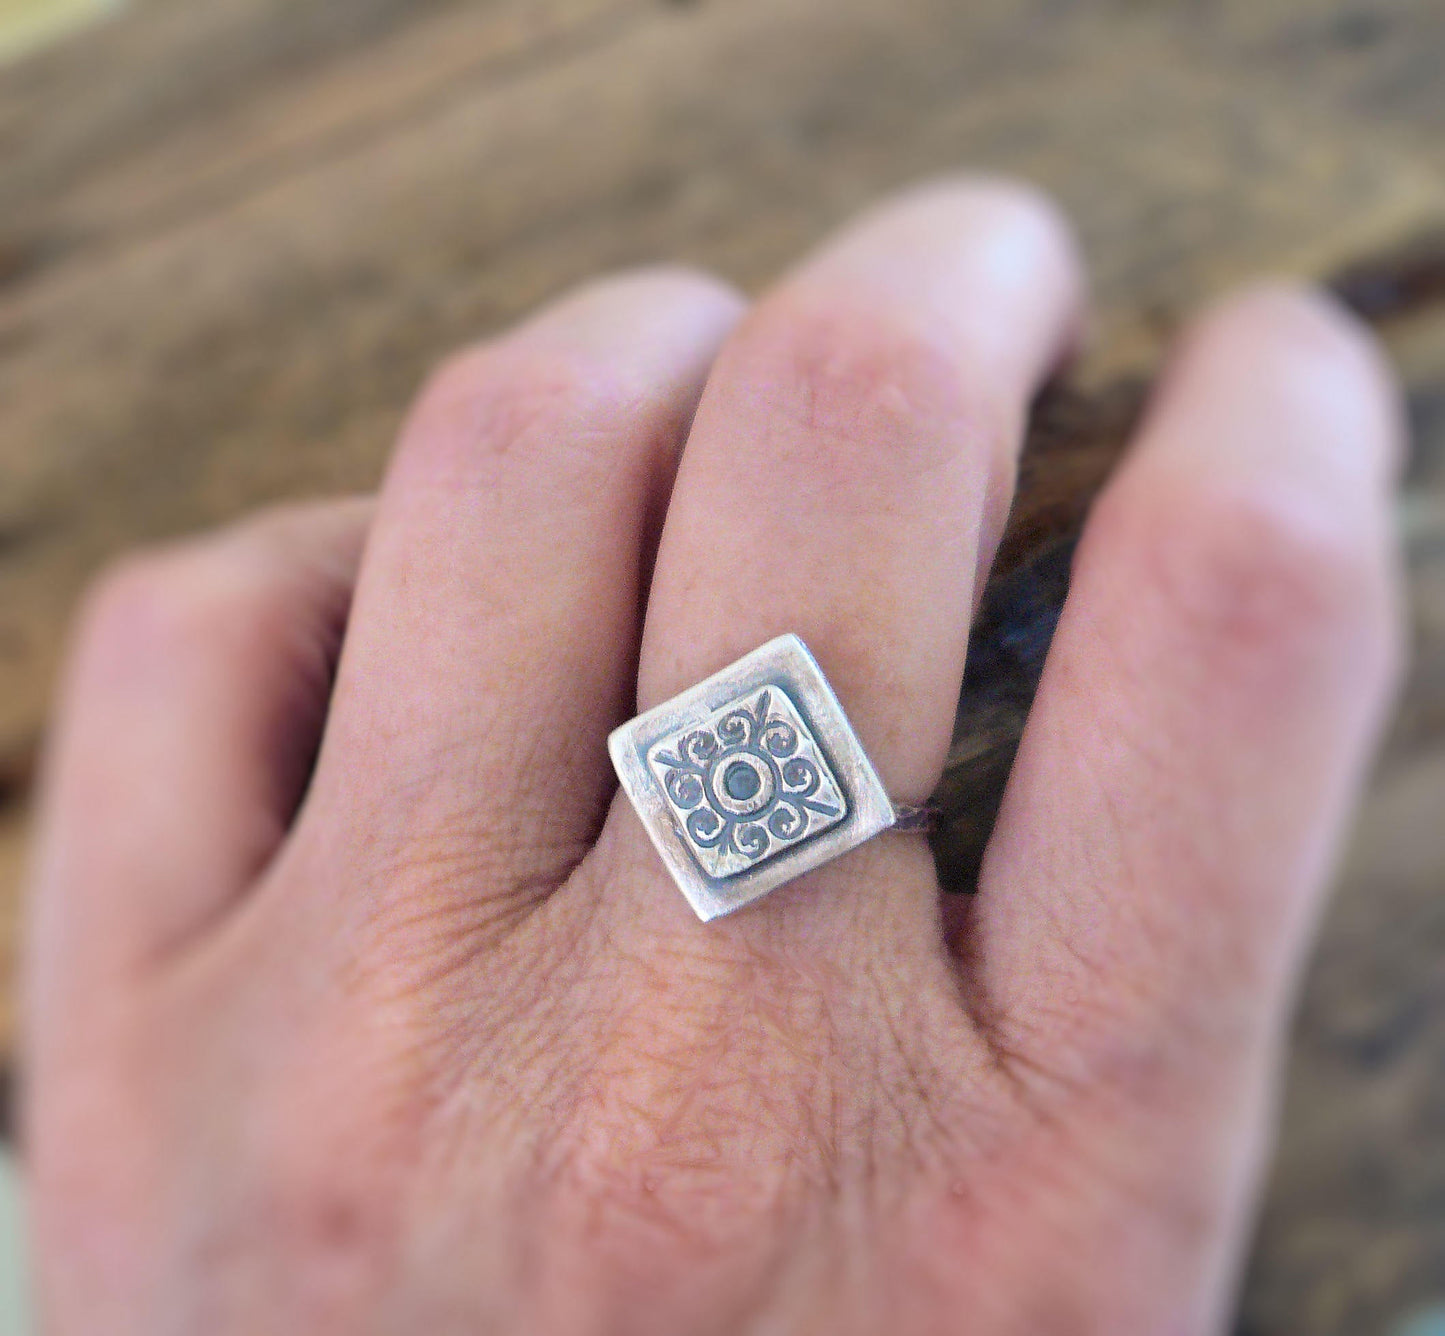 French Quarter Ring - Sterling & Fine Silver Oxidized Hammered Ring. Hand made by jNic Designs